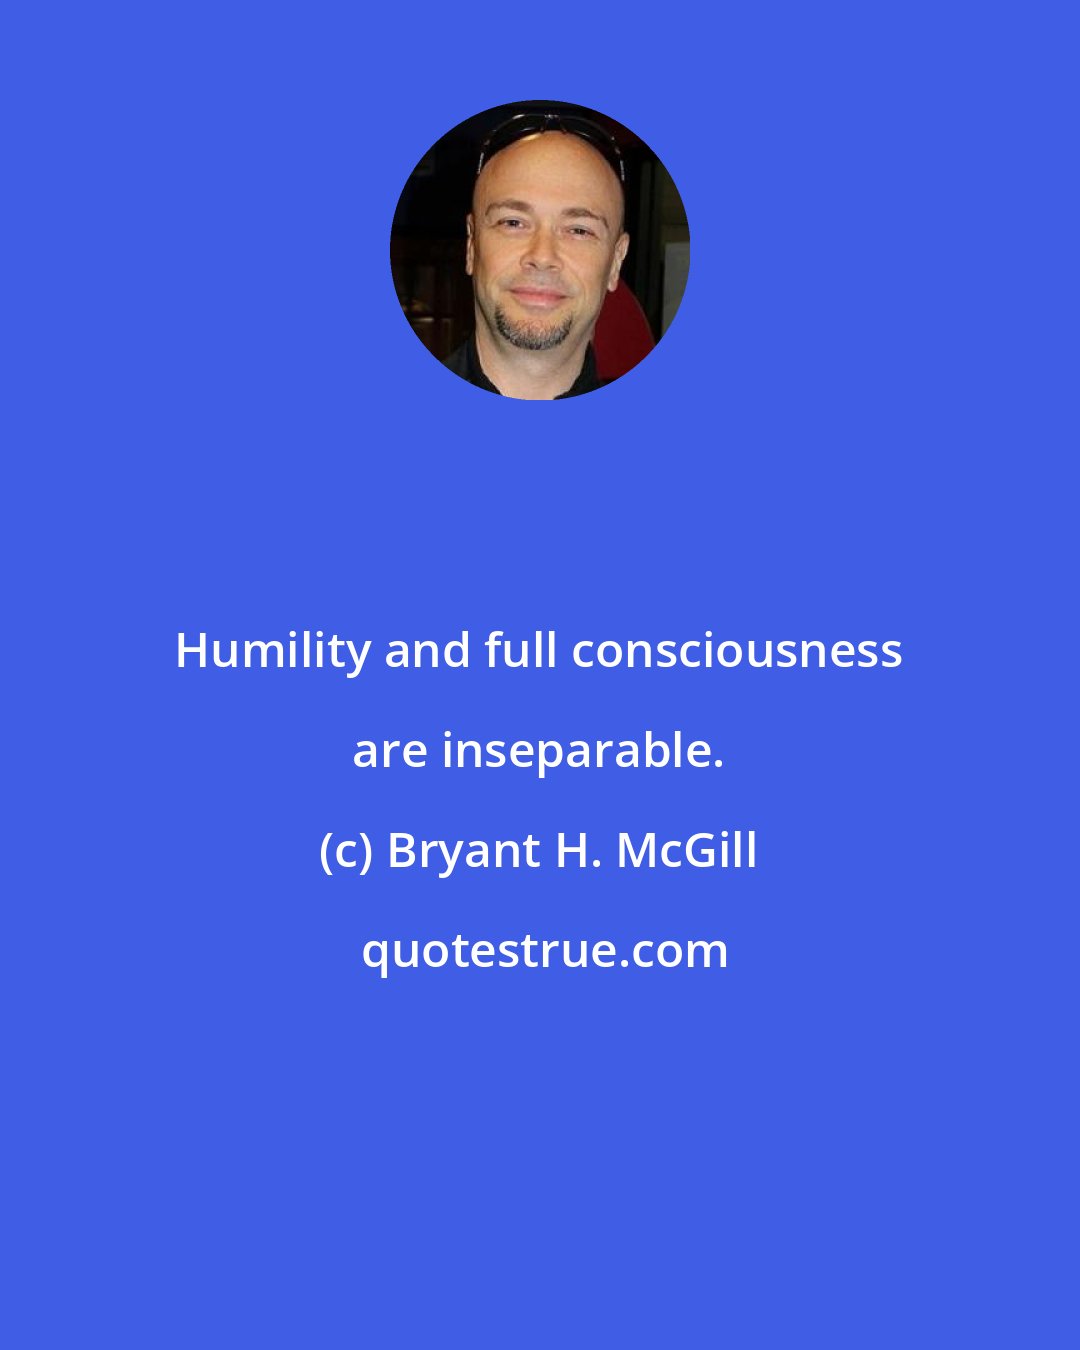 Bryant H. McGill: Humility and full consciousness are inseparable.